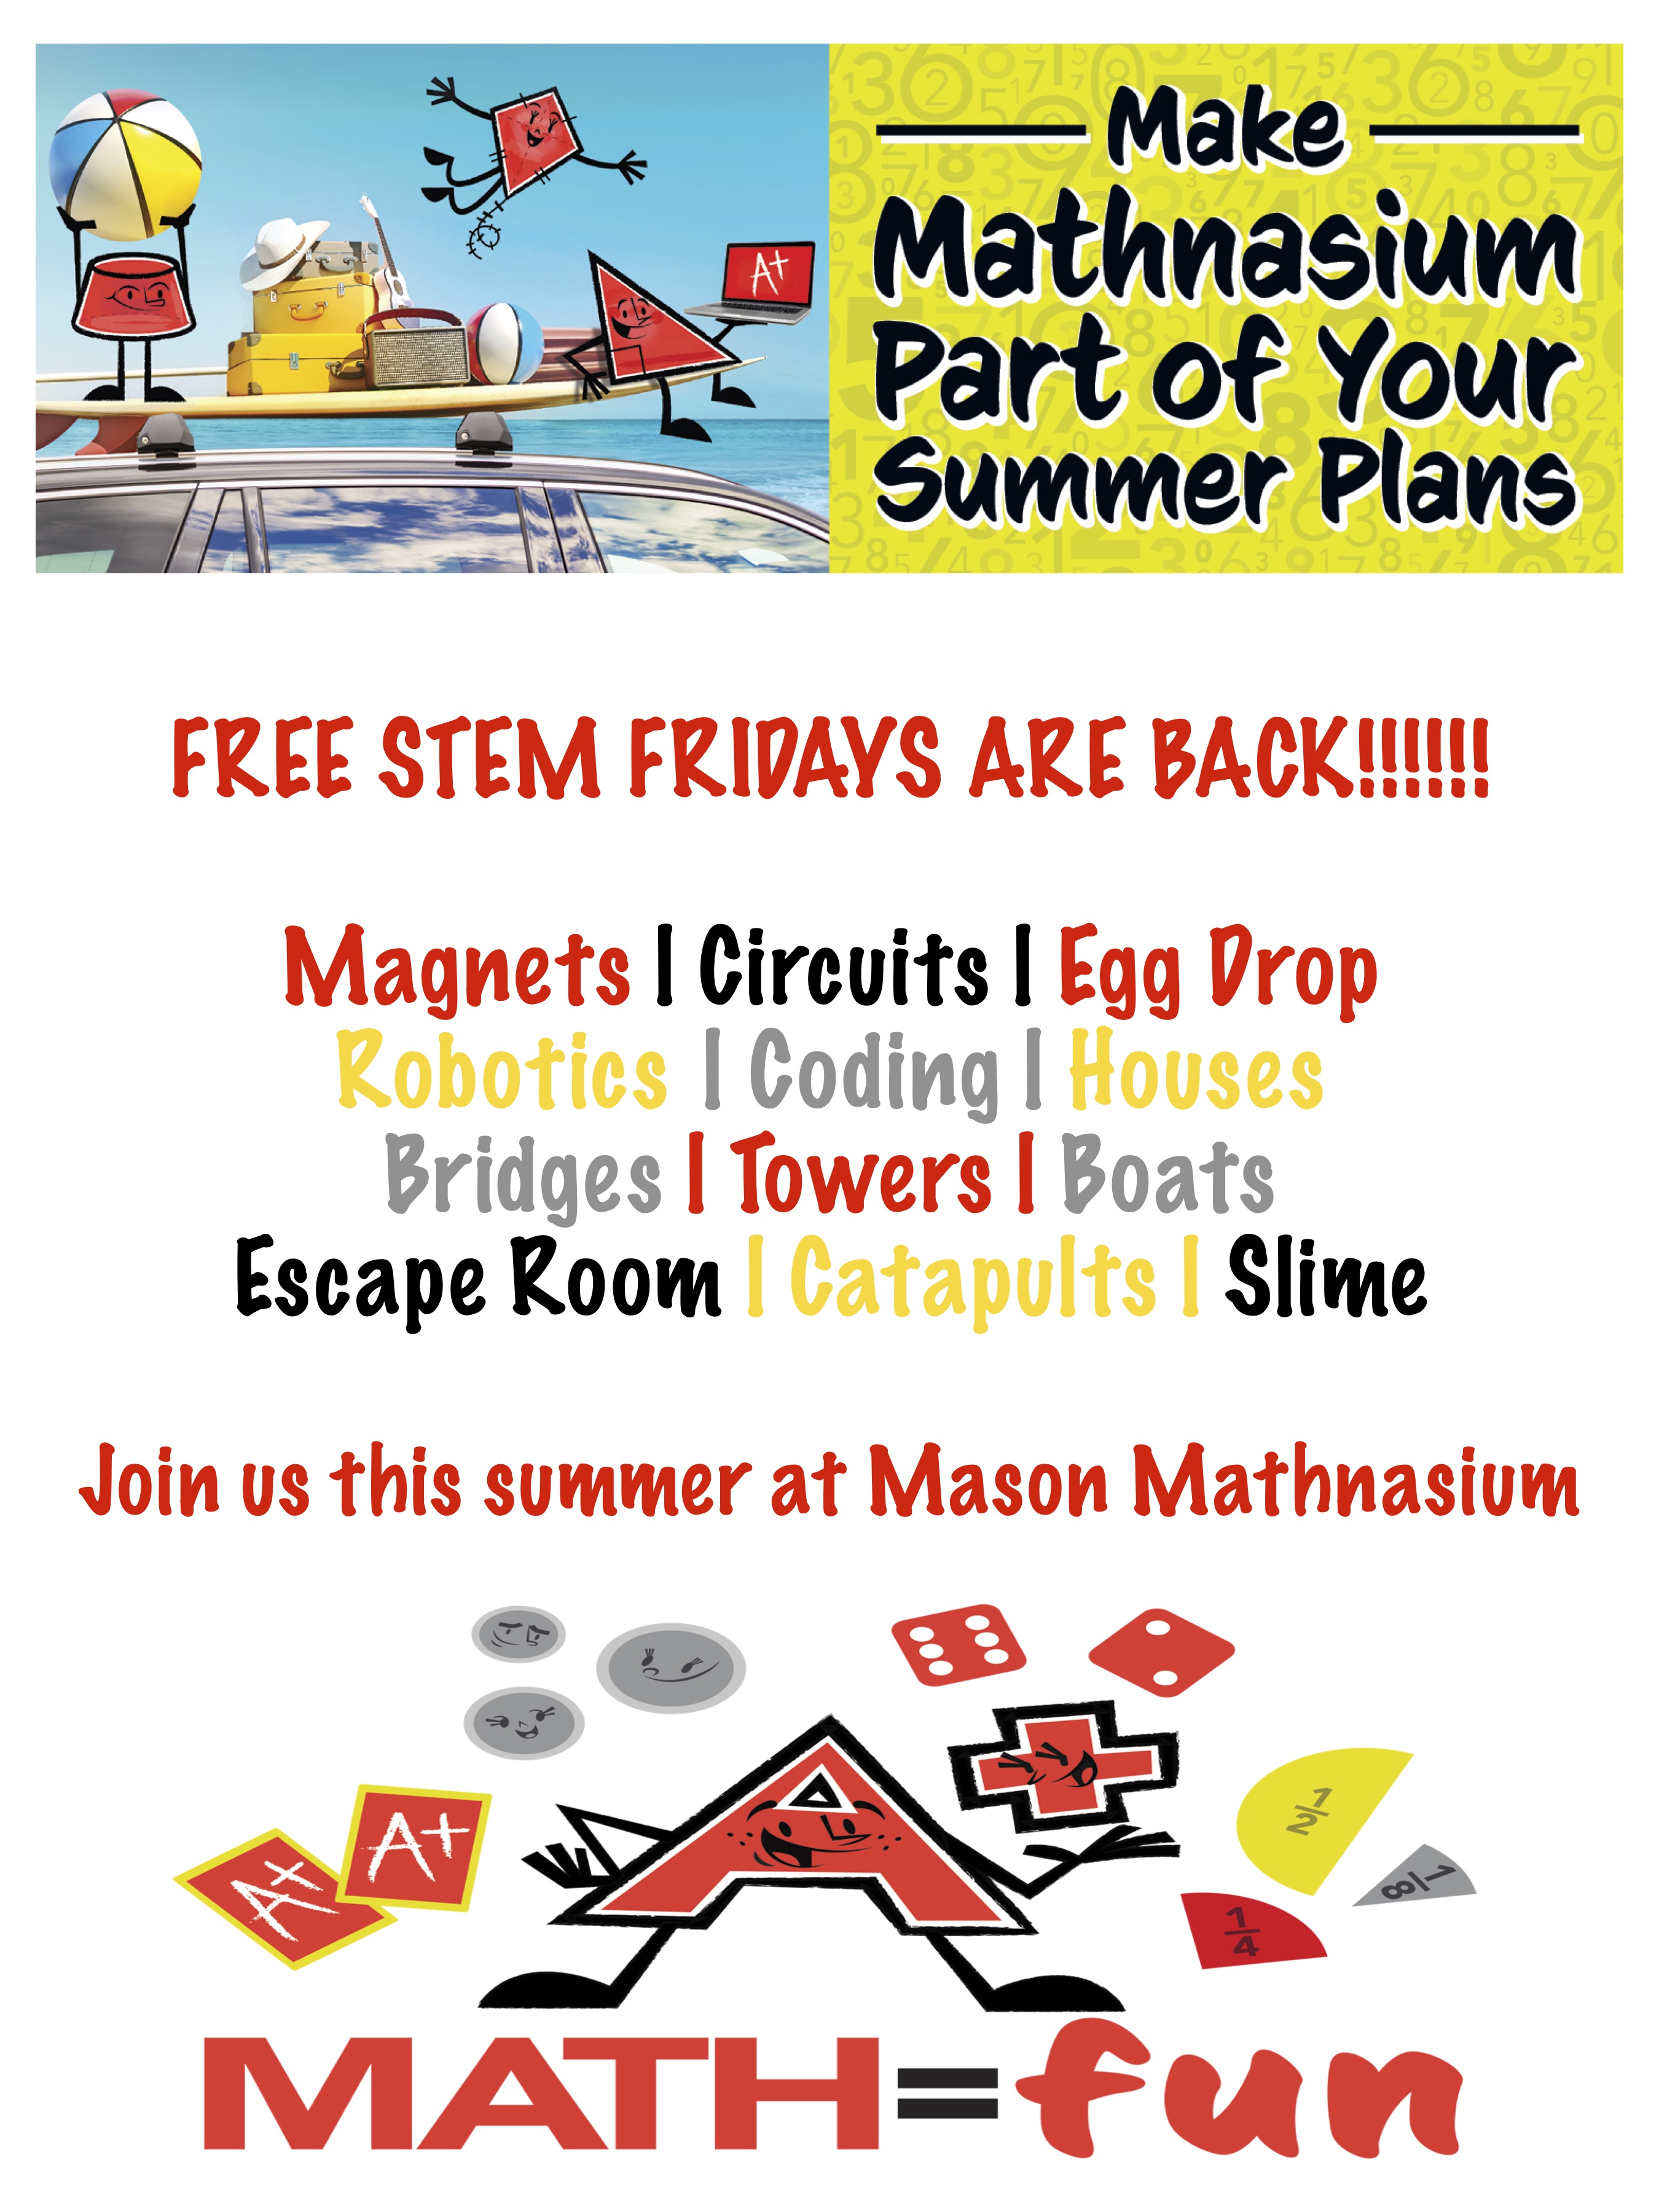 STEM Fridays are Back!!!!!!!  June 7th through August 9th Noon to 1PM